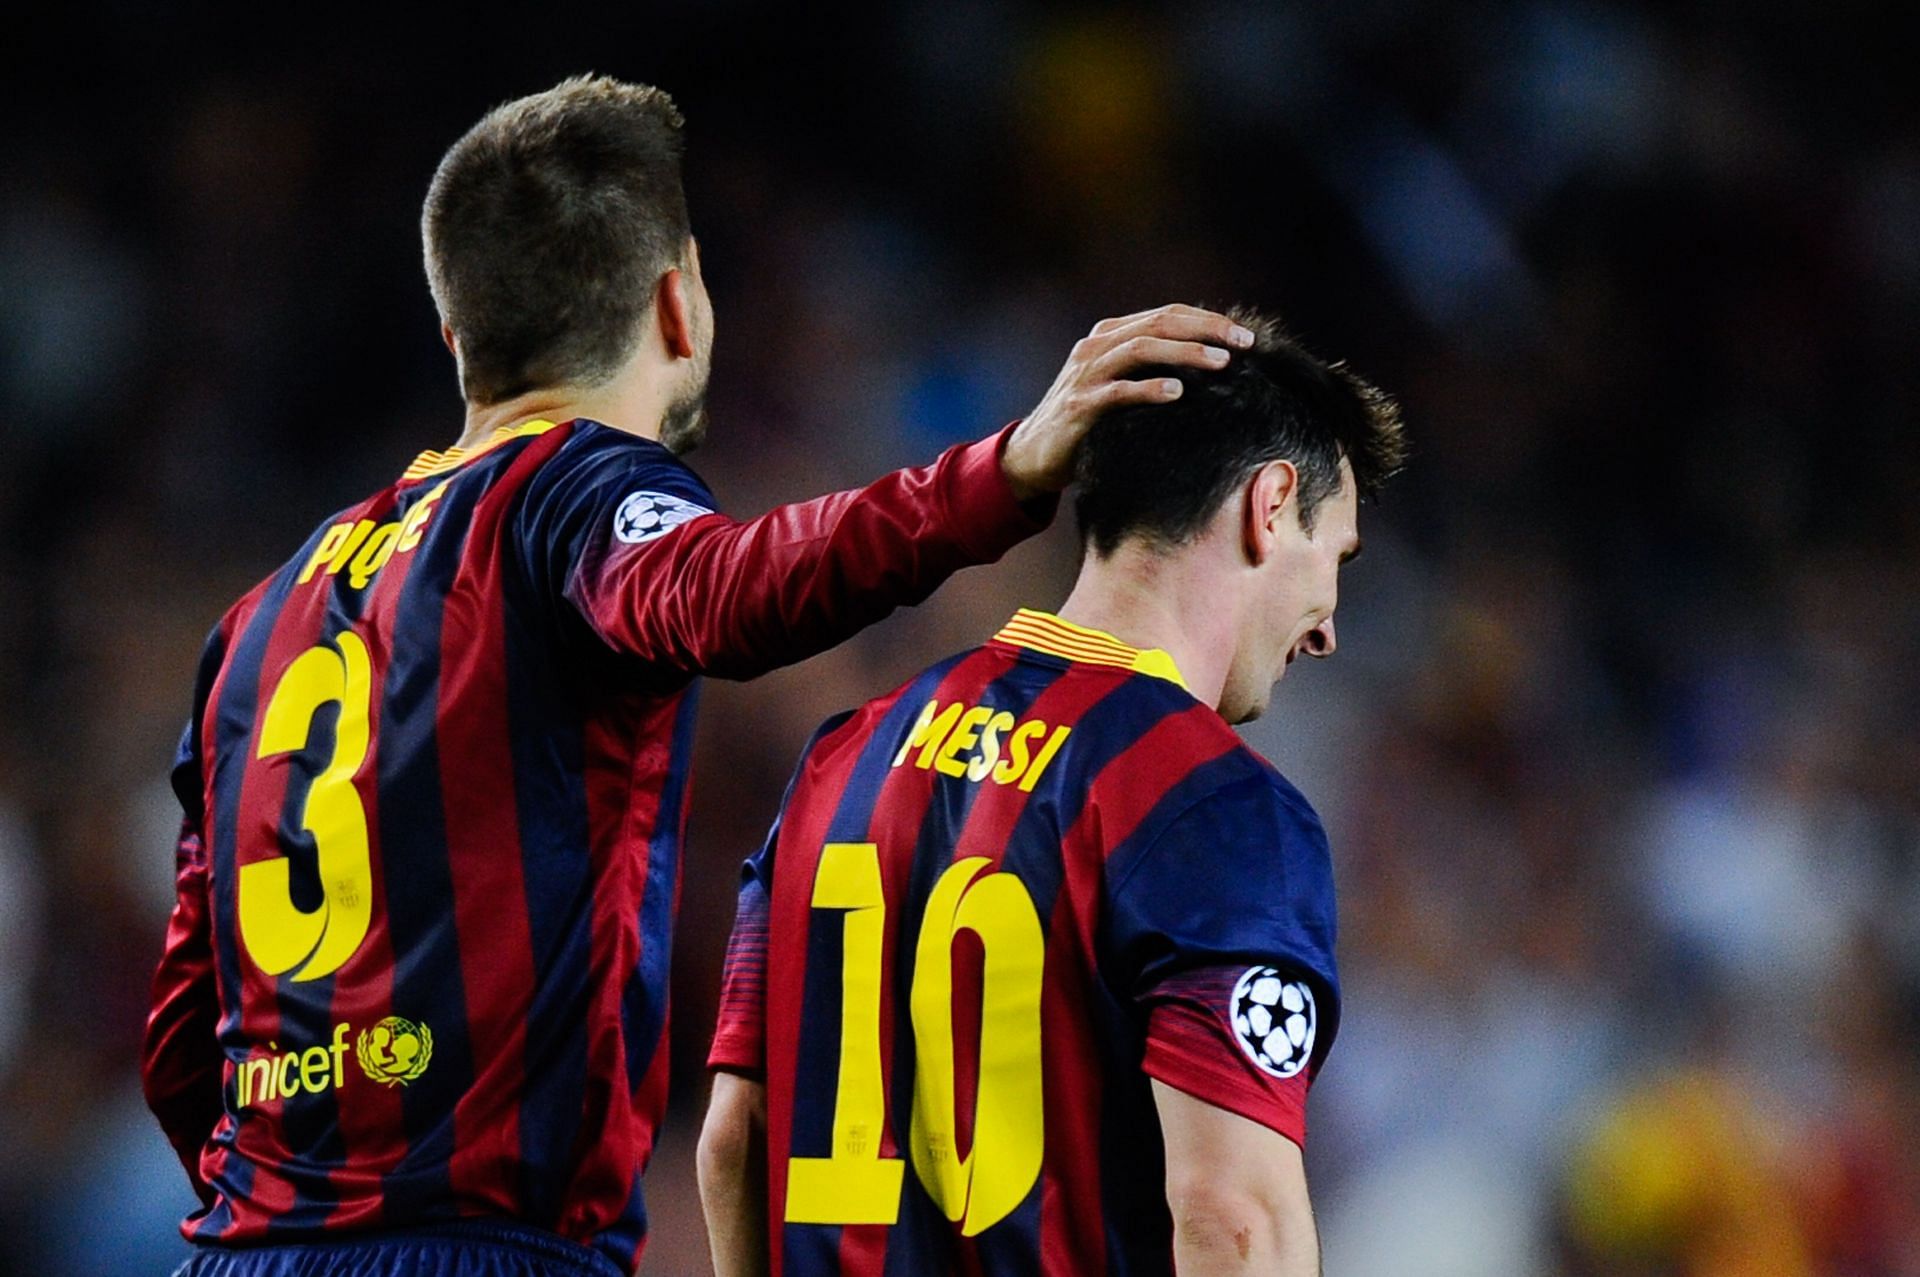 Lionel Messi and G&eacute;rard Pique were teammates since their academy days